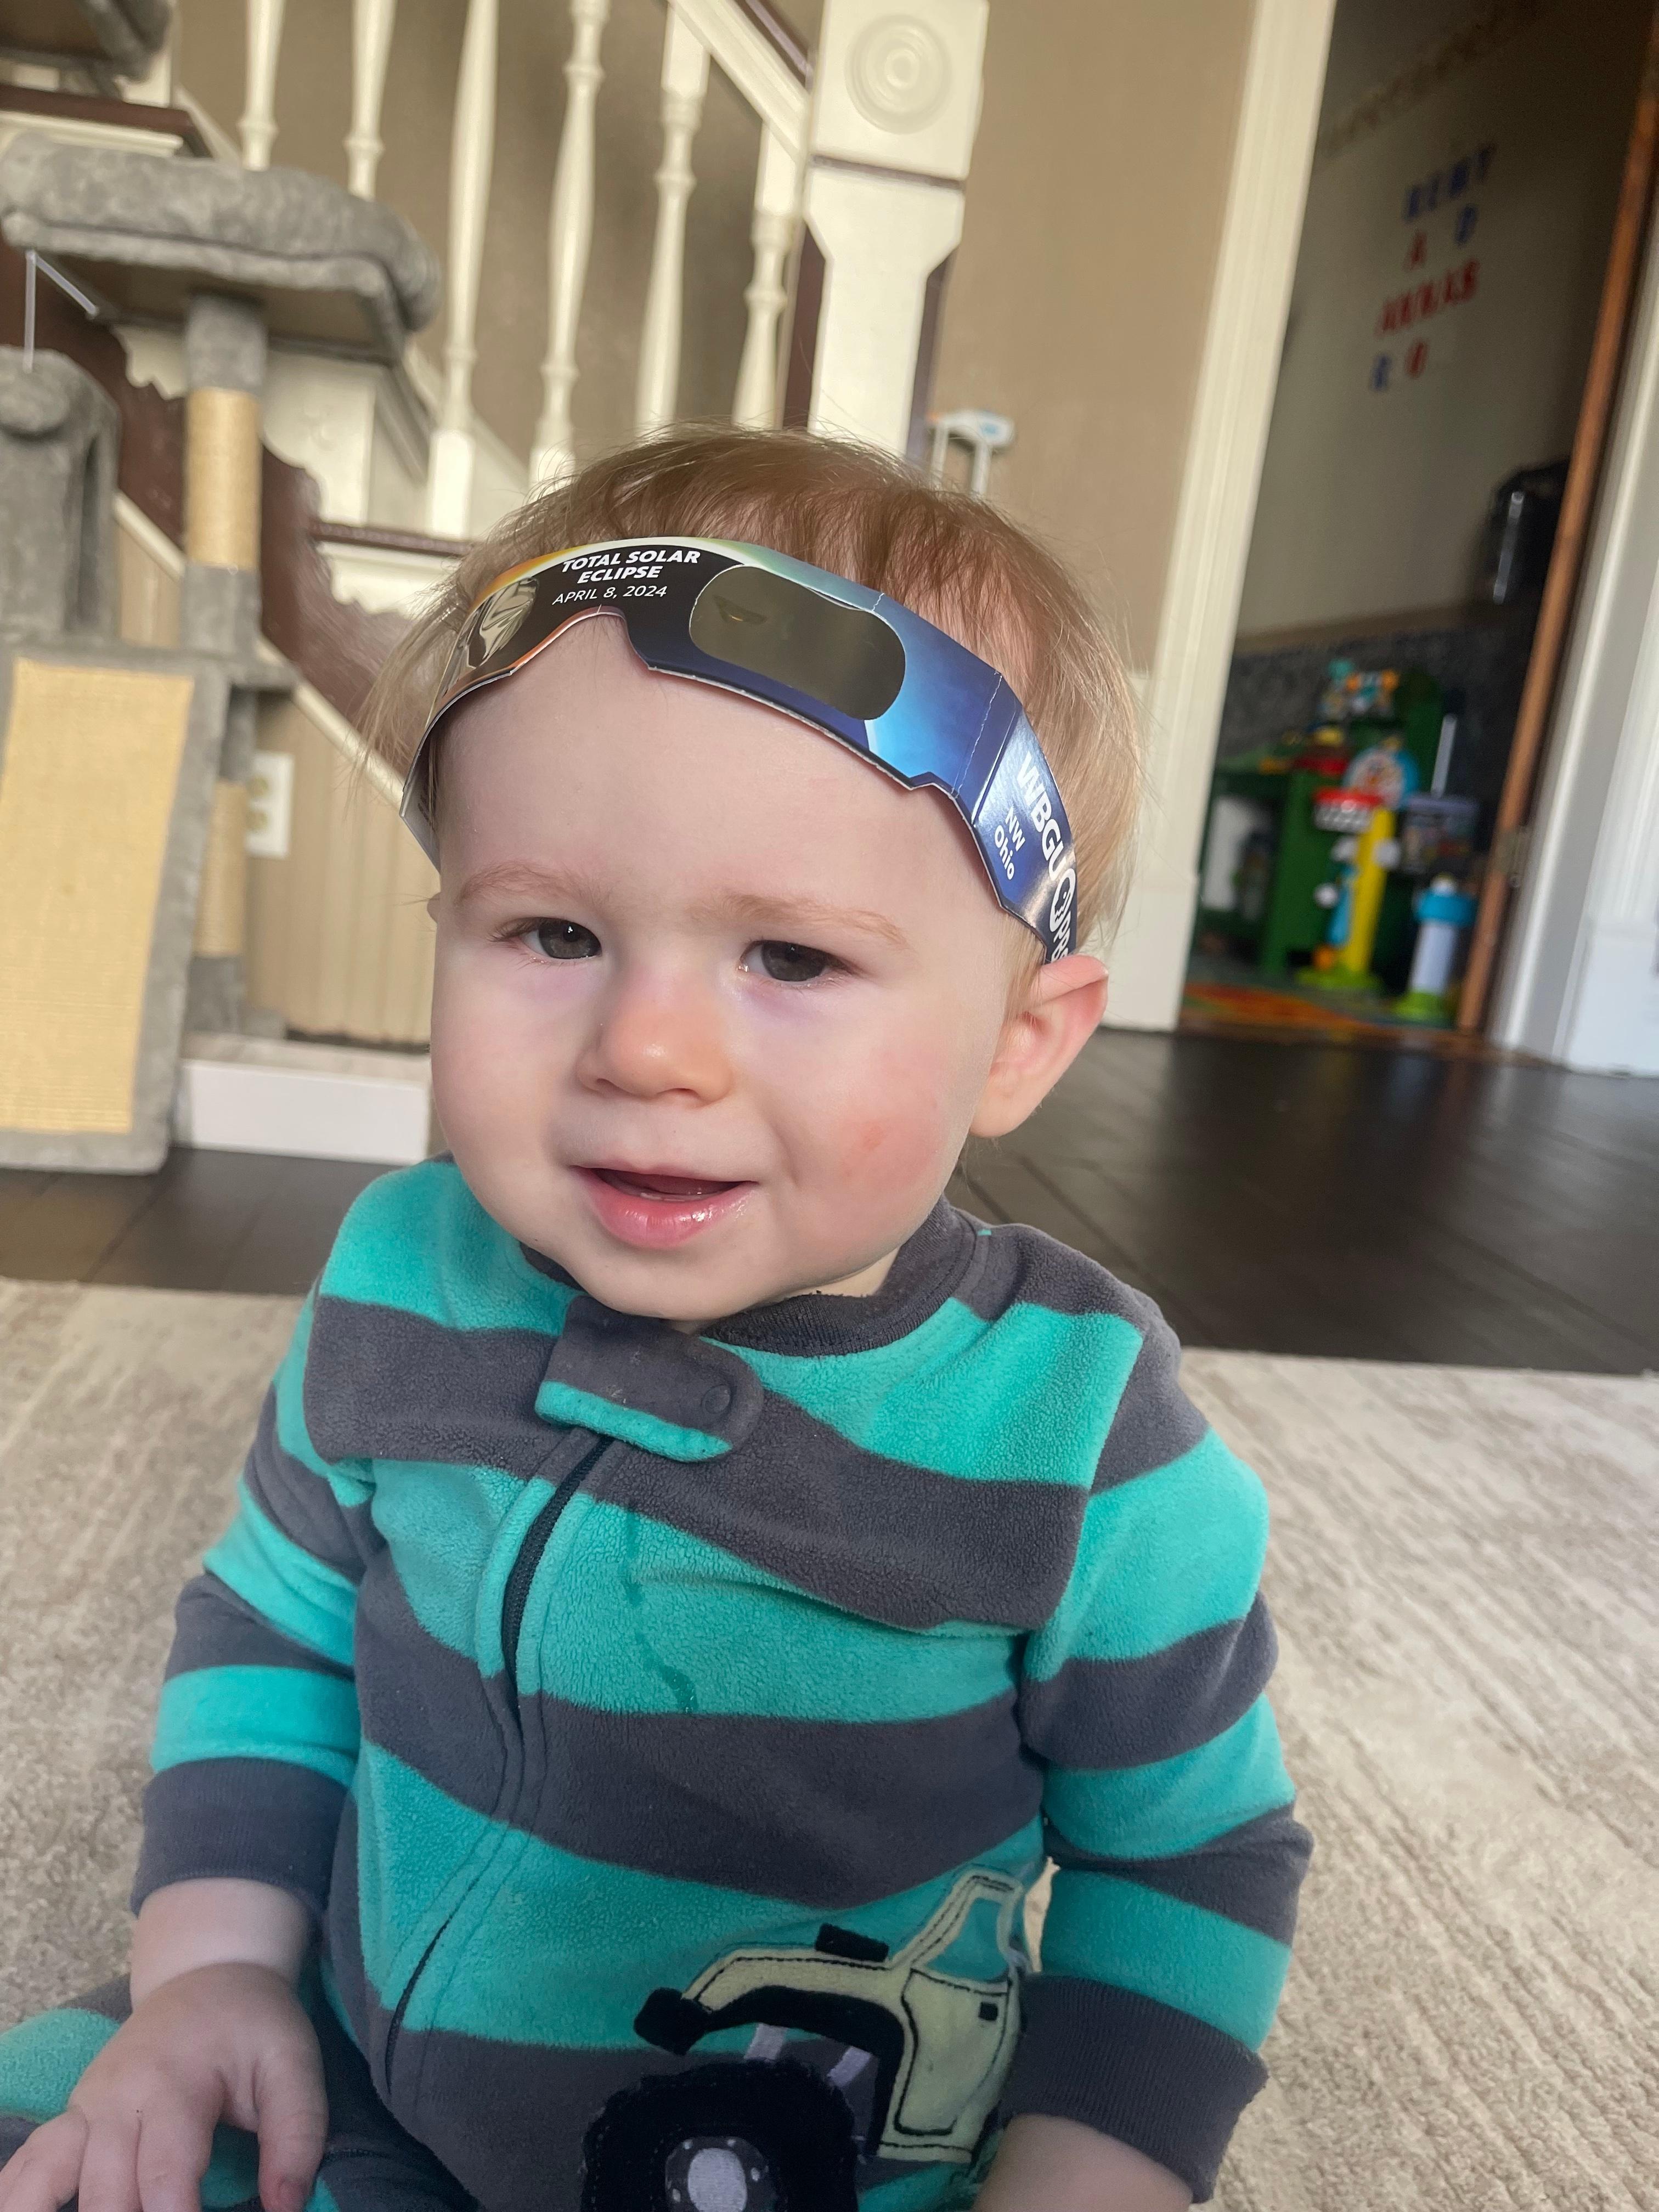 Baby with solar eclipse glasses propped on forehead